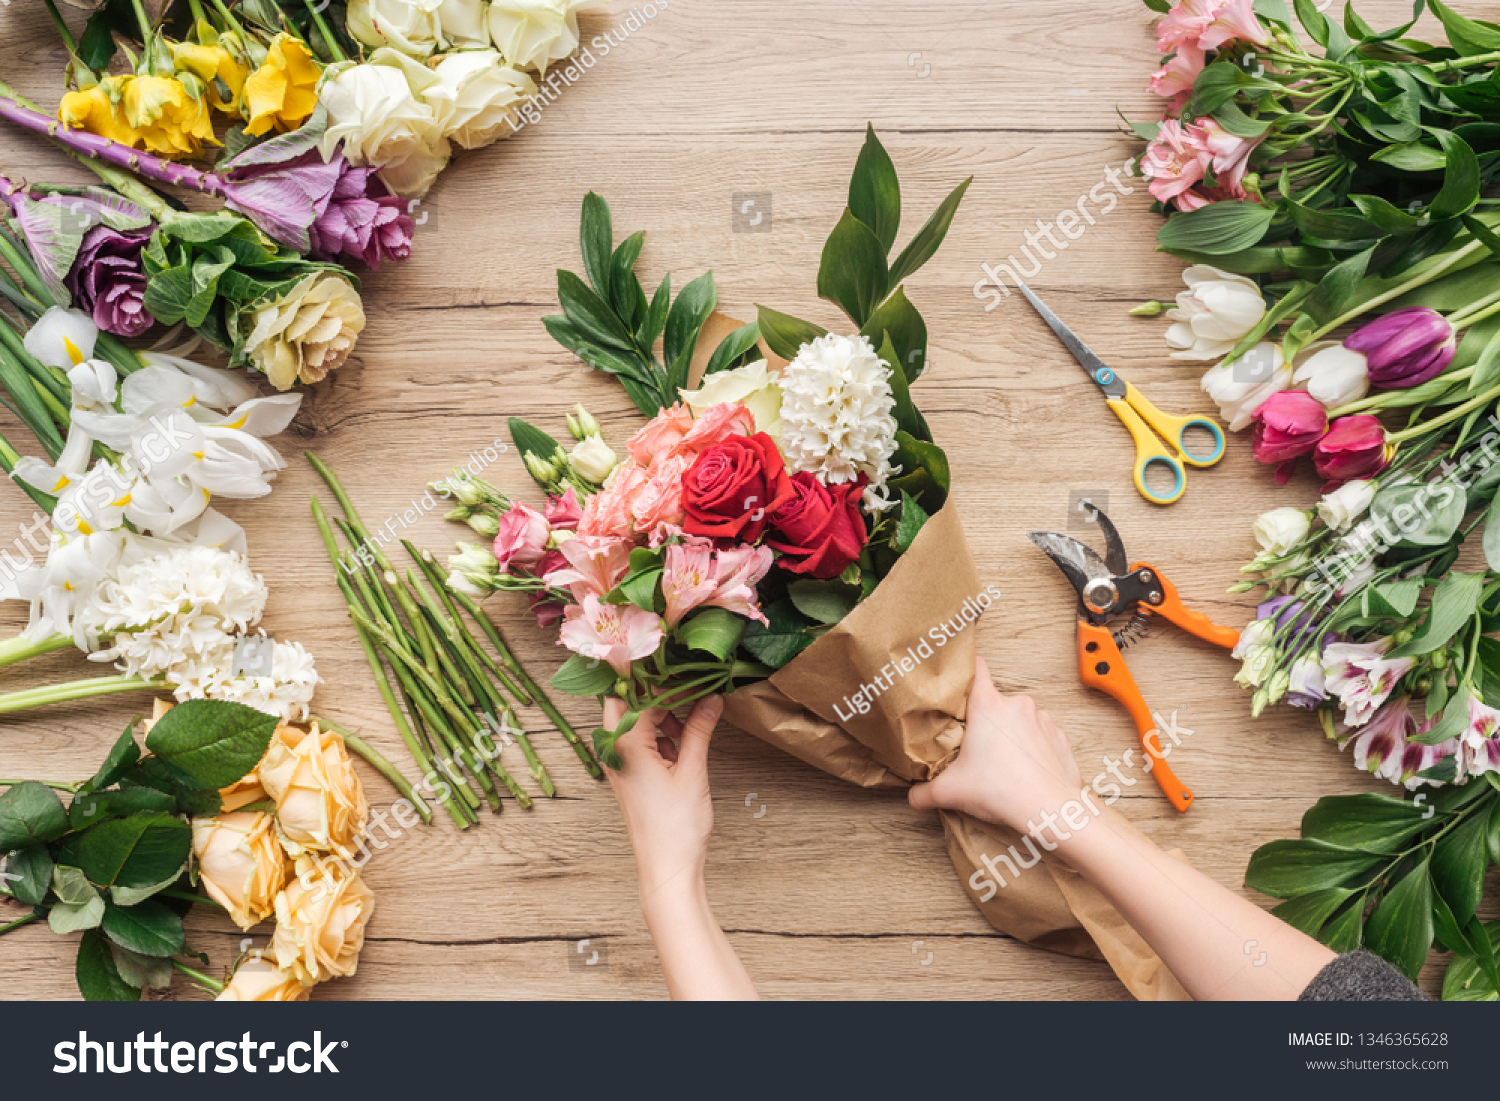 Cropped view of florist making flower bouquet on wooden surface #1346365628